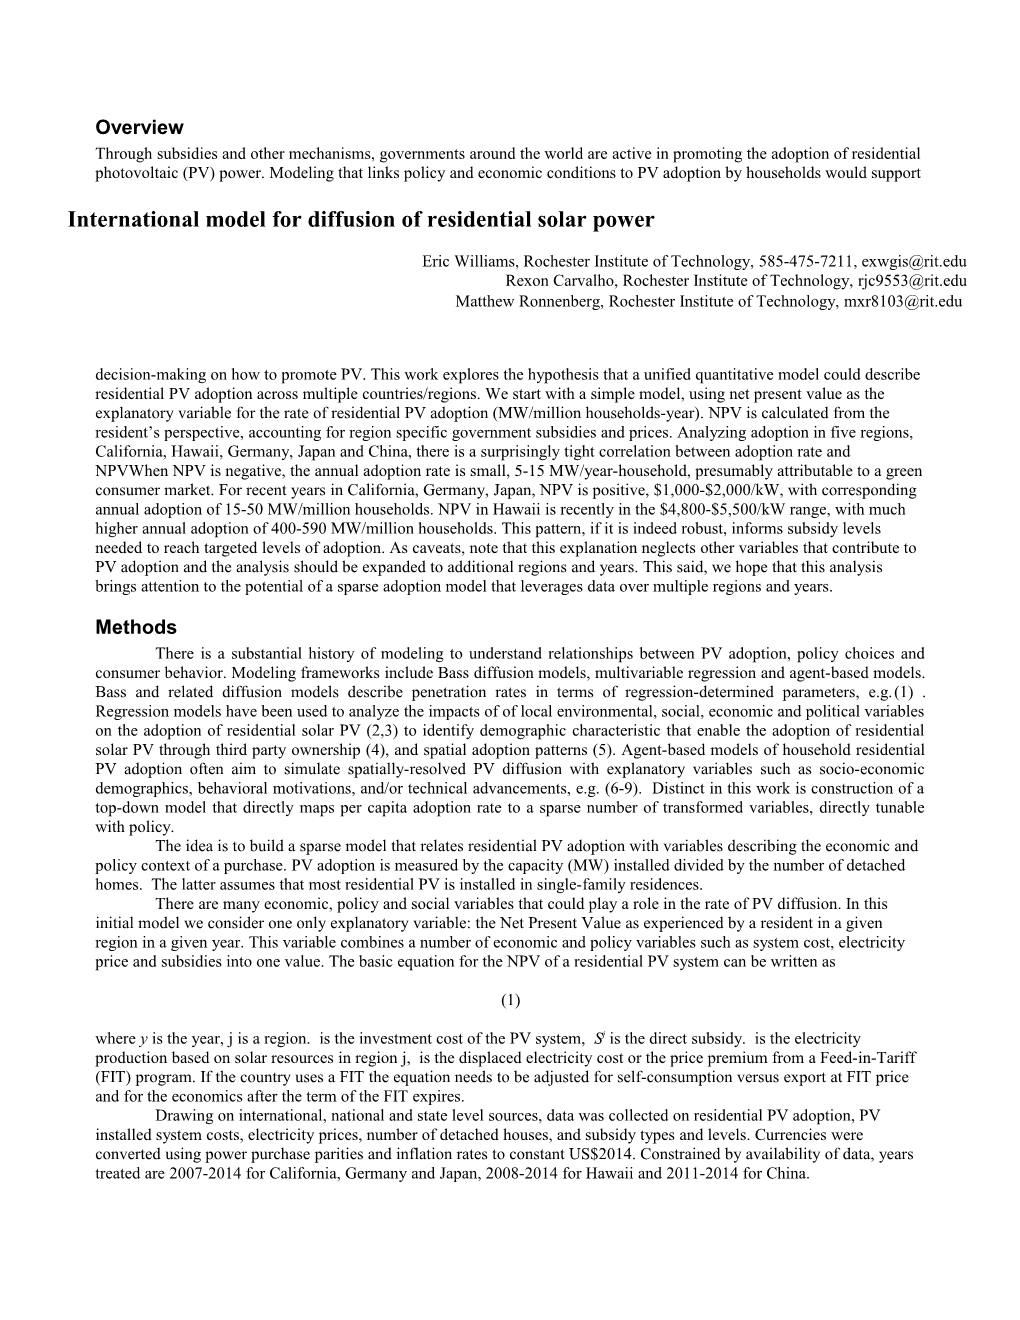 International Model for Diffusion of Residential Solar Power